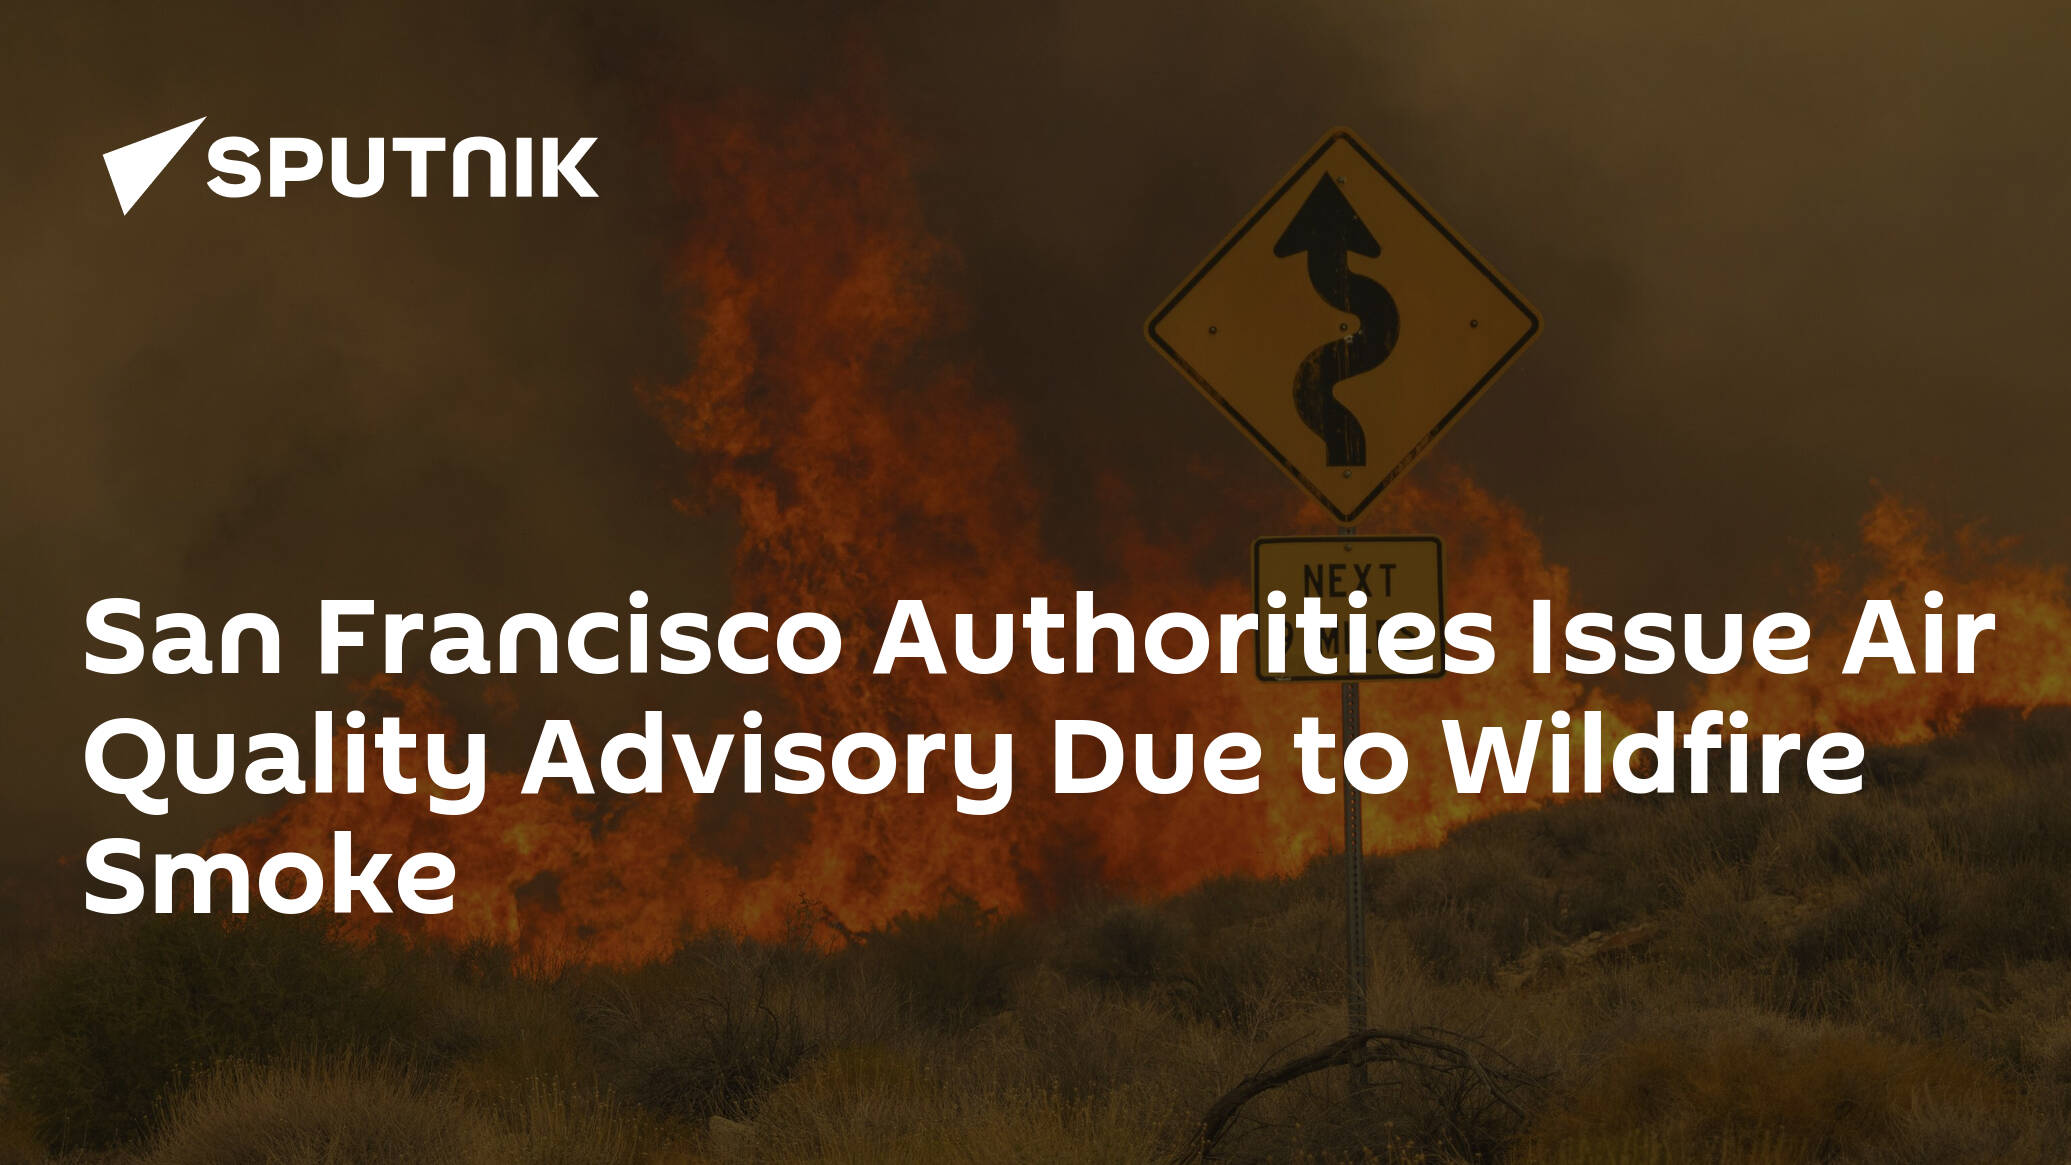 San Francisco Authorities Issue Air Quality Advisory Due to Wildfire Smoke